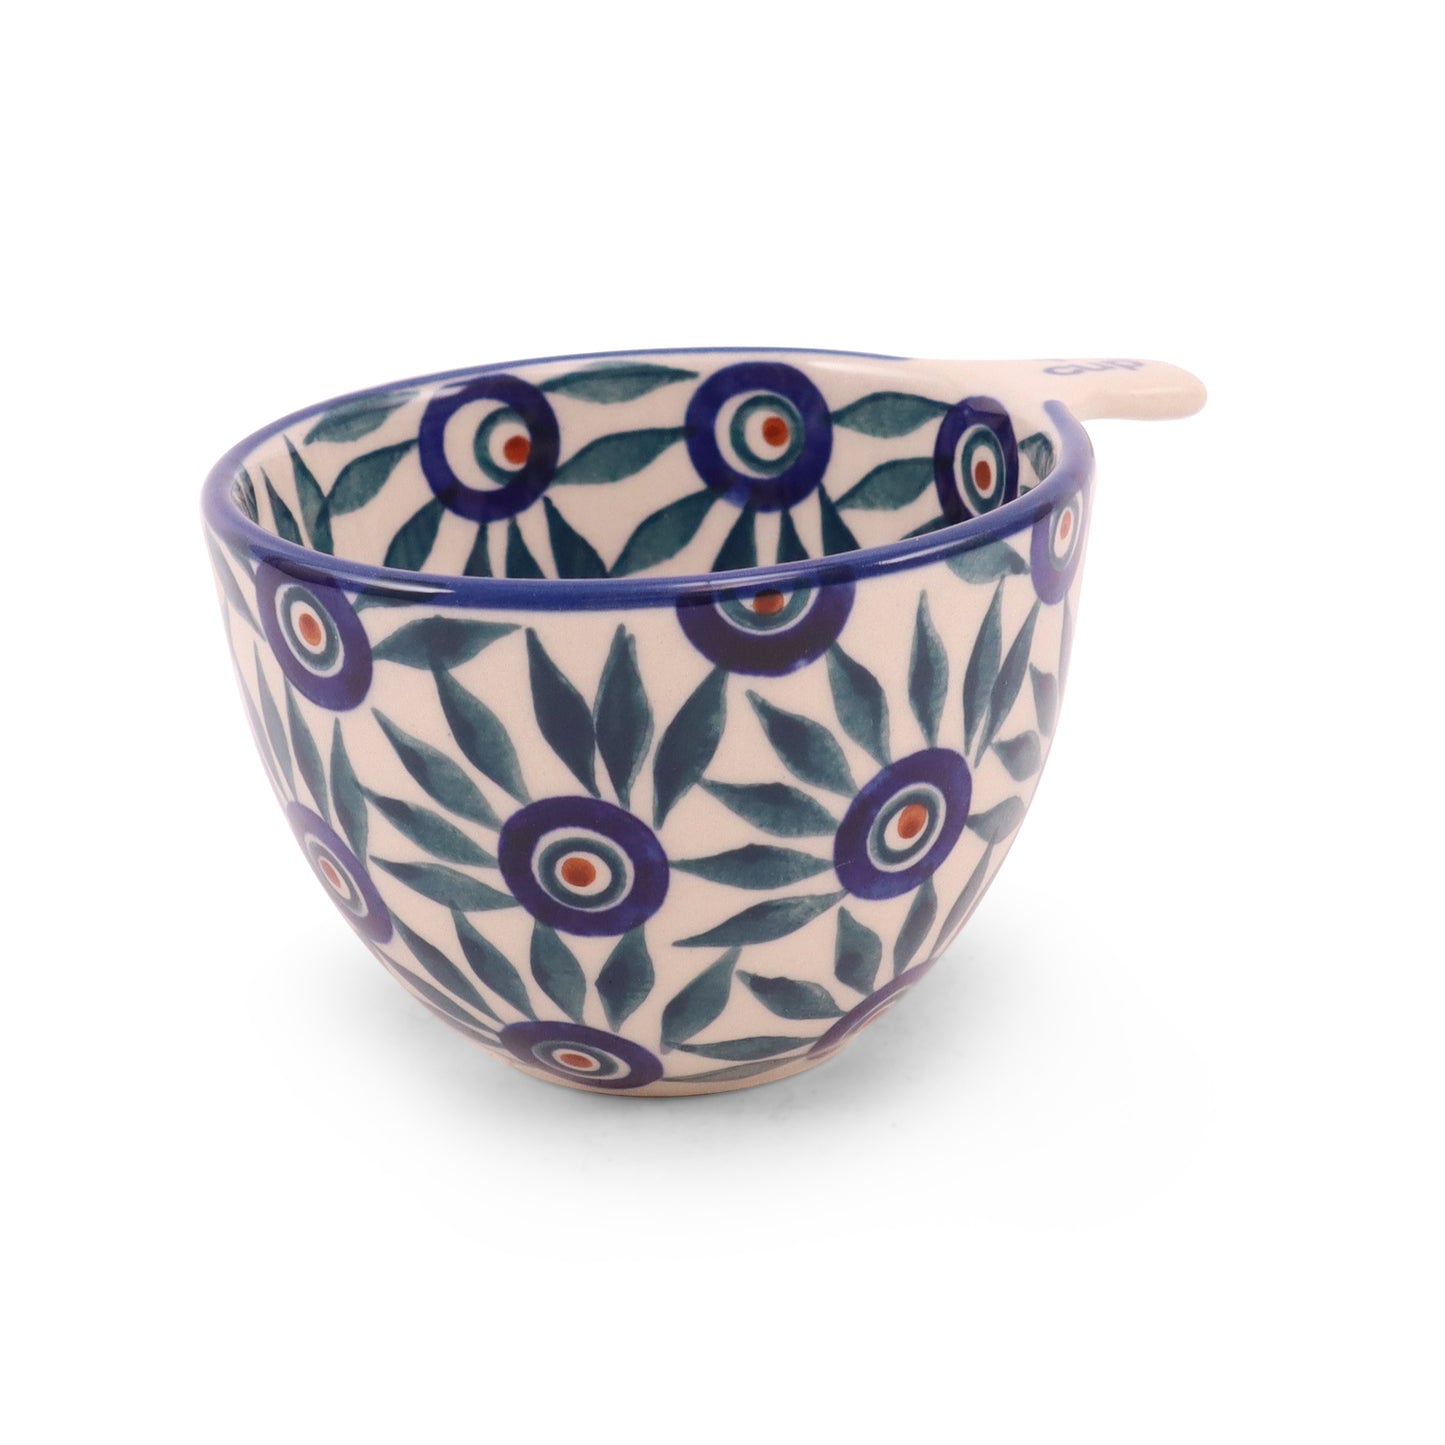 1 Cup Measuring Cup. Pattern: Modern Peacock